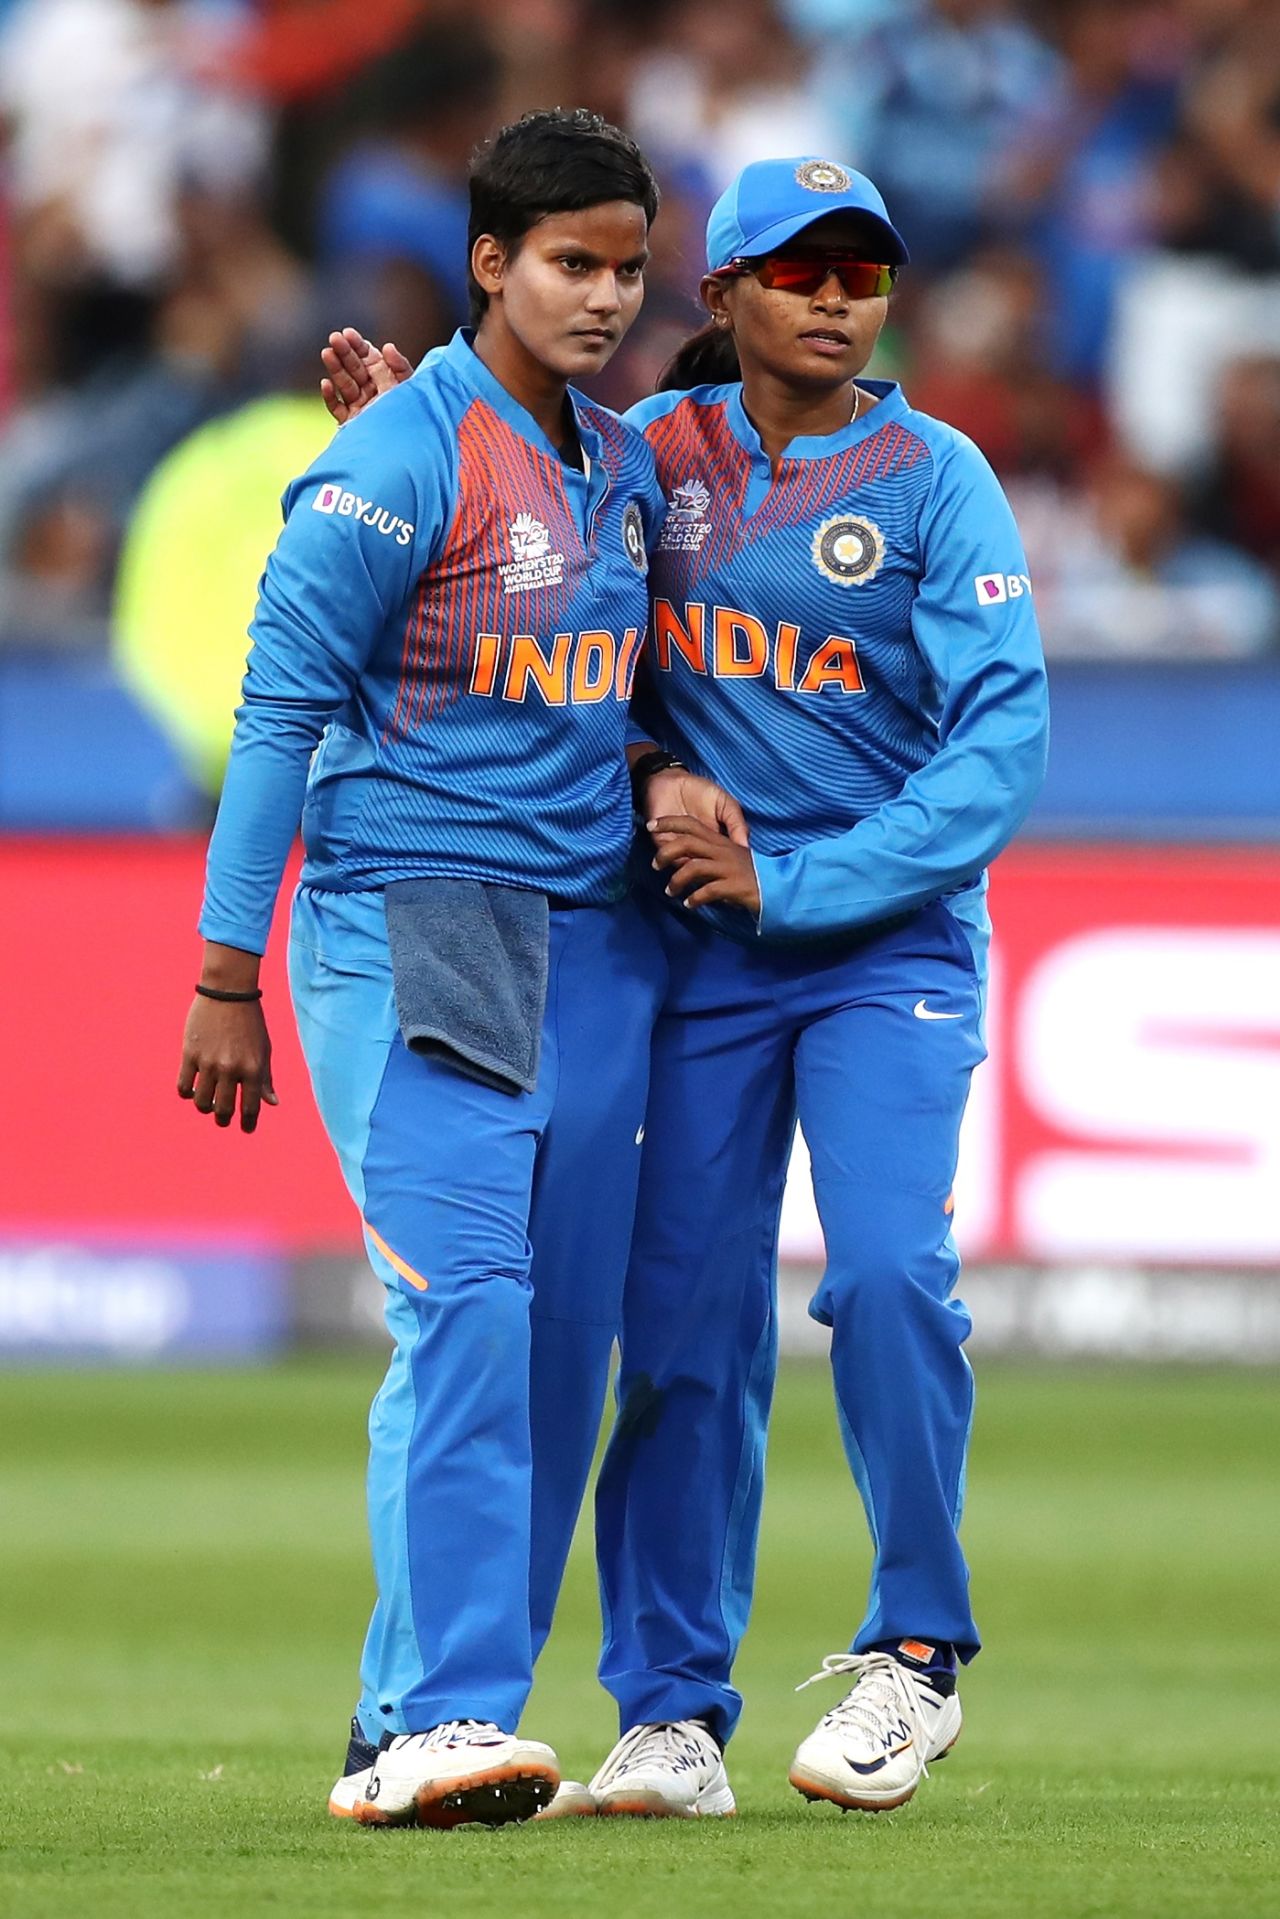 Deepti Sharma picked up two wickets, Australia v India, final, Women's T20 World Cup, Melbourne, March 8, 2020